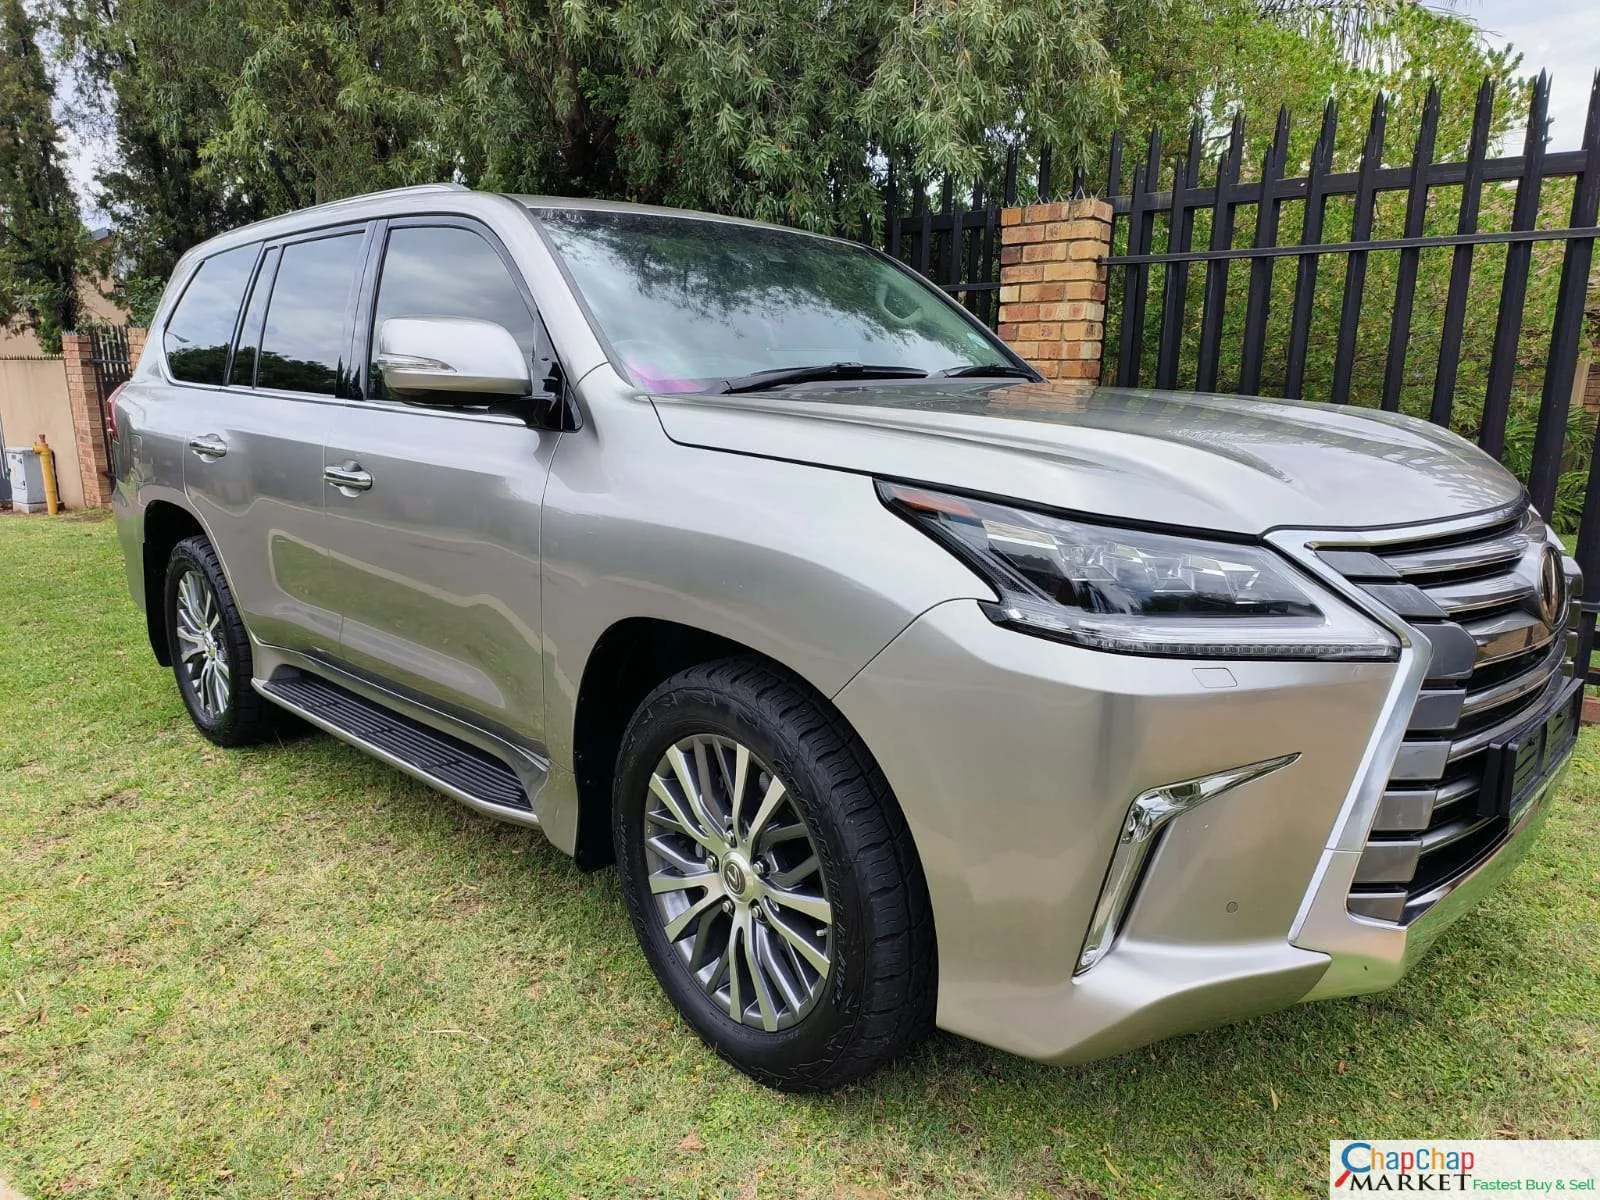 LEXUS LX 450D 450 D Fully Loaded EXCLUSIVE! HIRE PURCHASE installments lx450D for sale in kenya